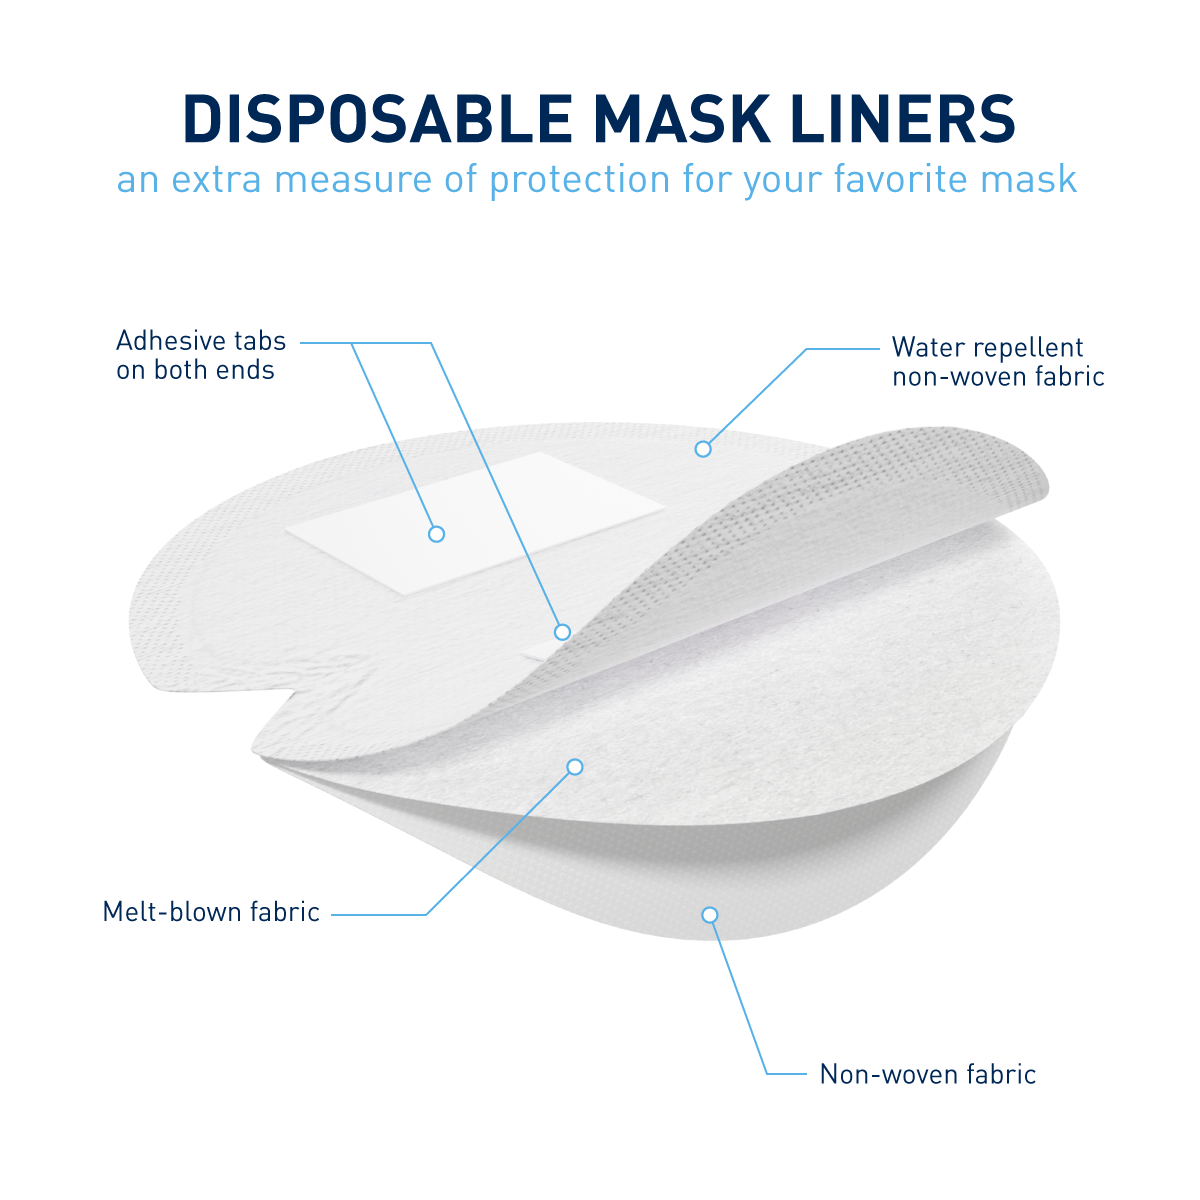 disposable mask liners material 